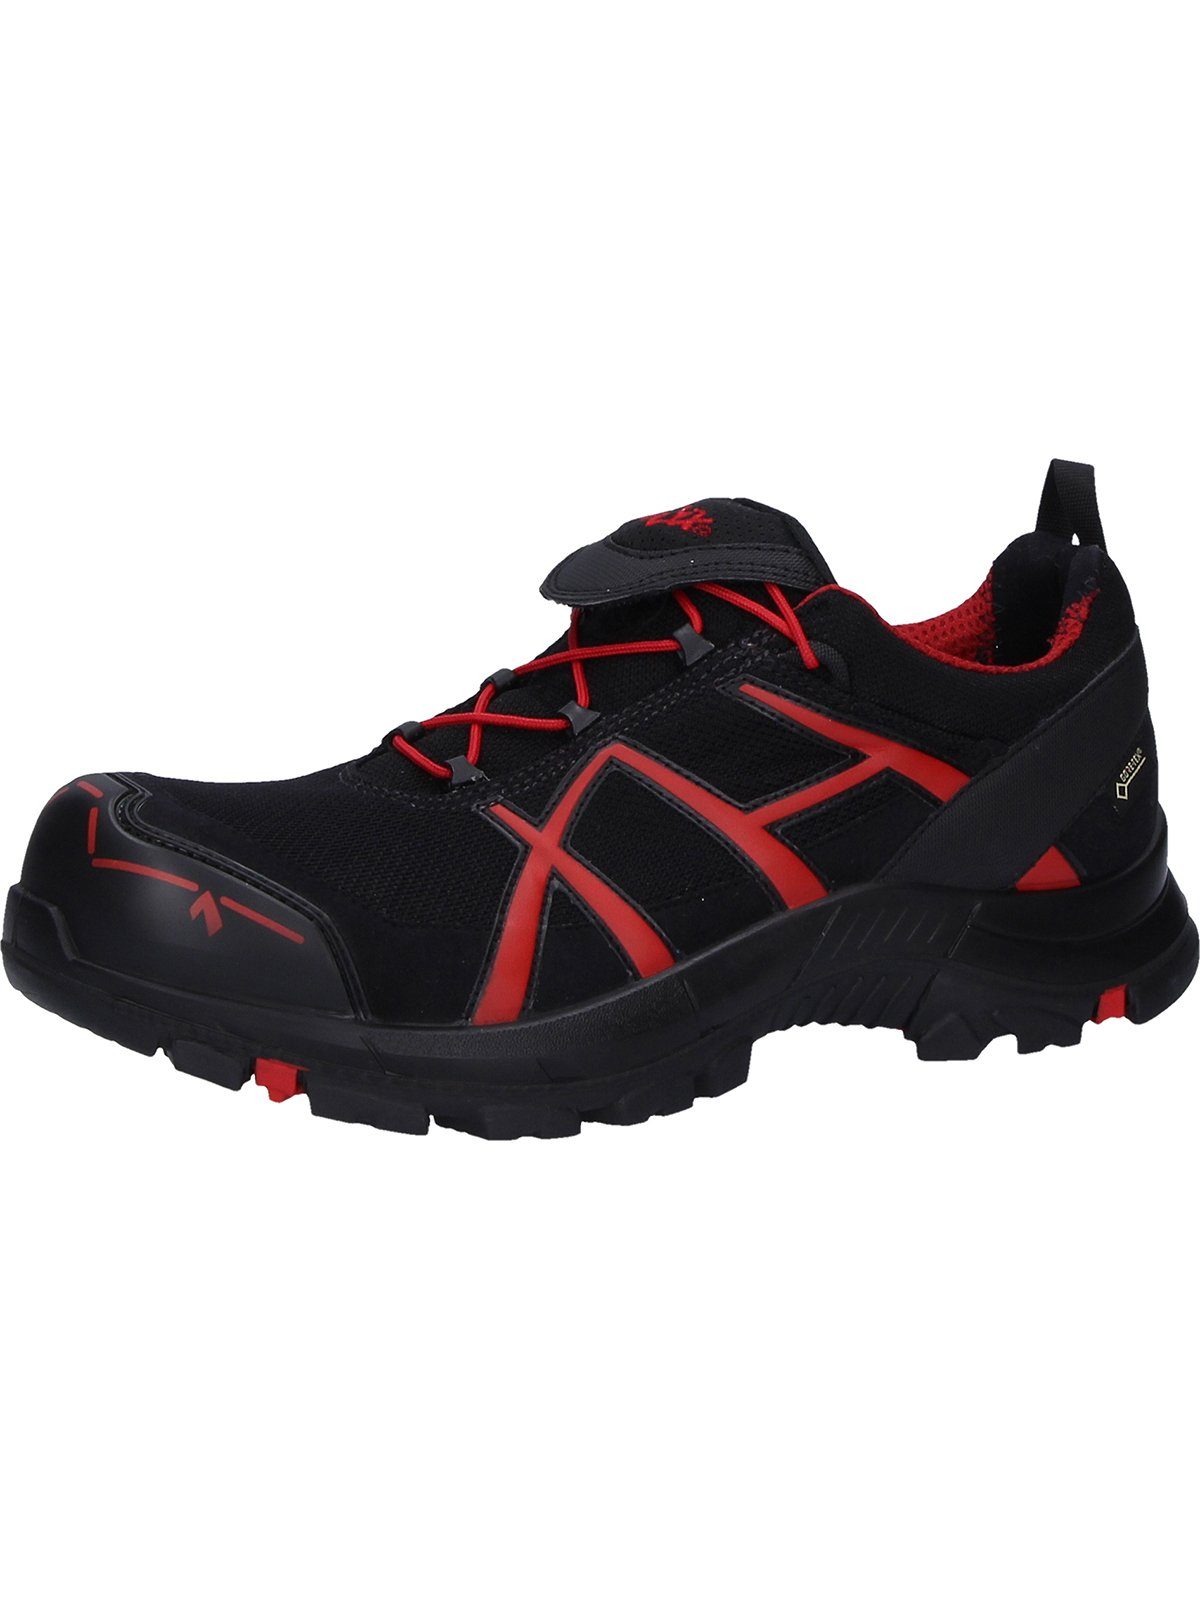 Safety Black haix 40.1 low Arbeitsschuh Eagle black/red